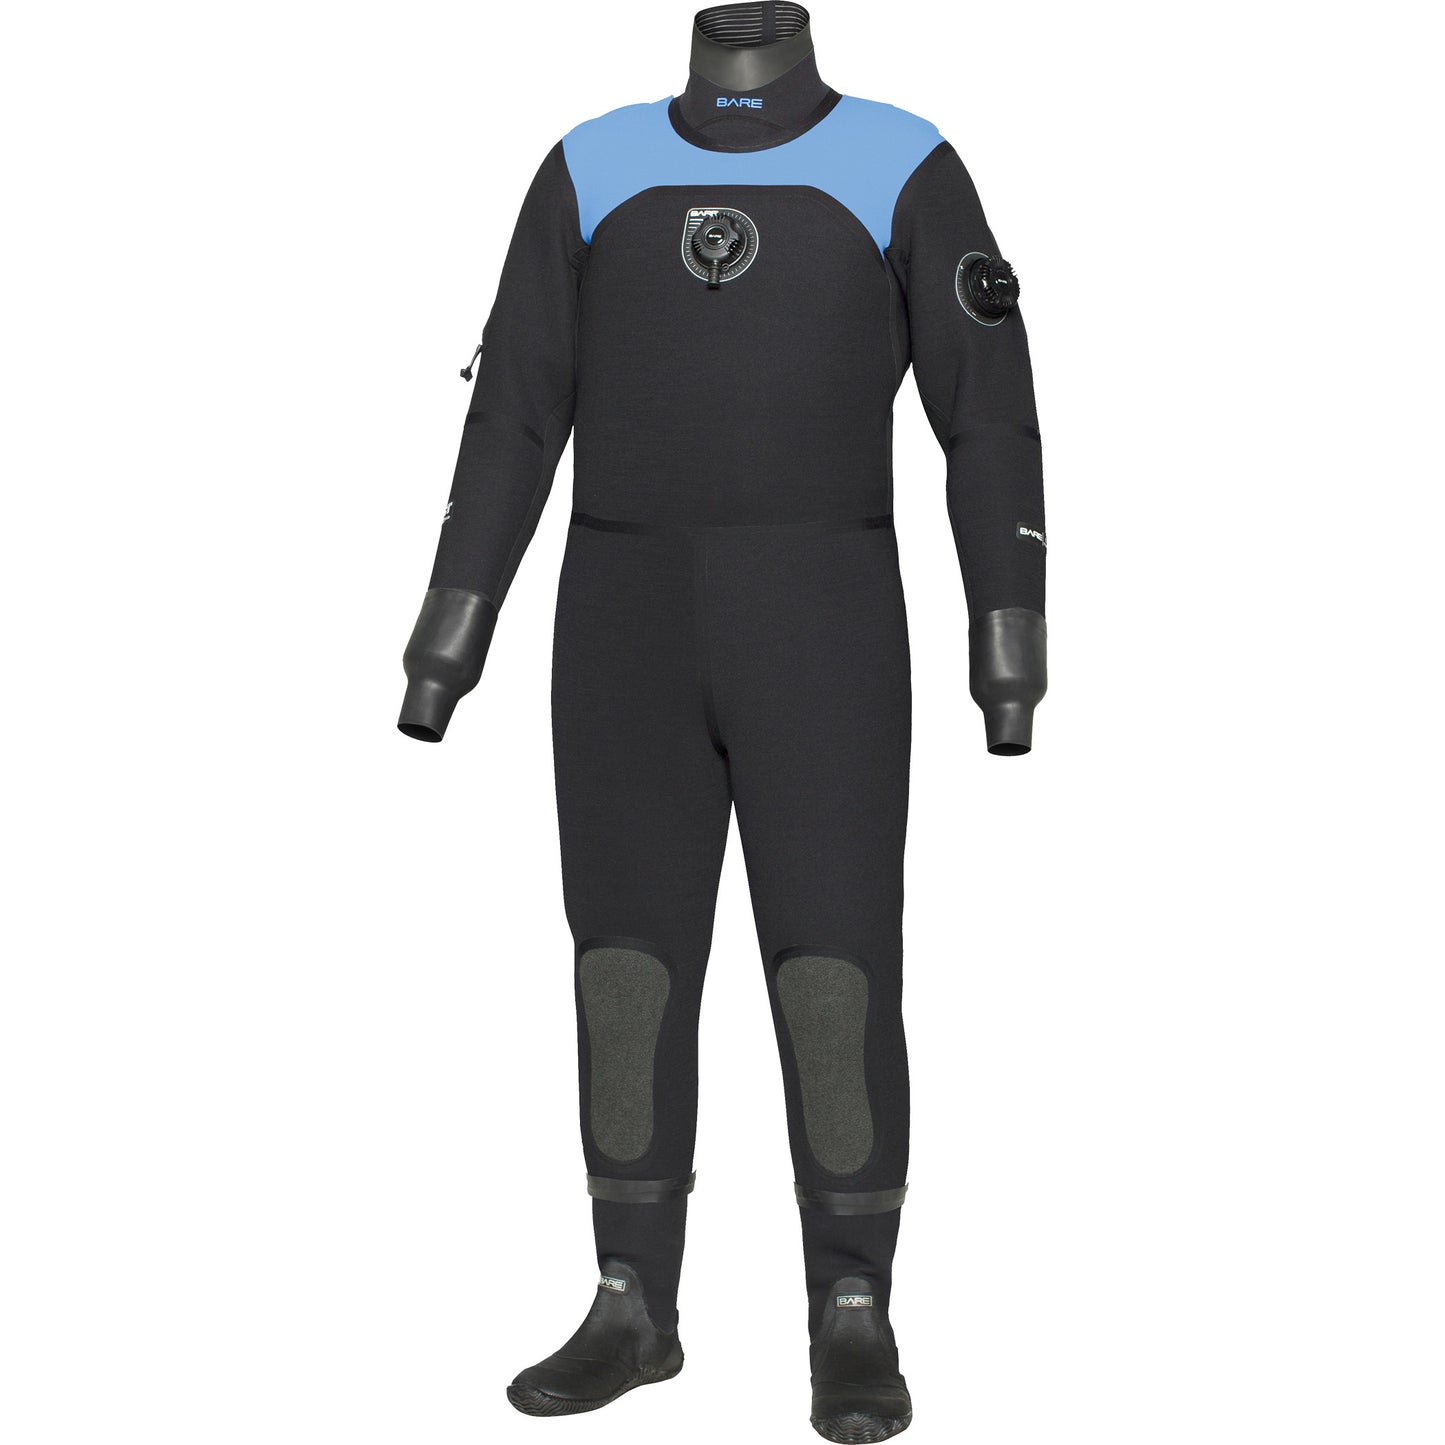 ONLY CD4 Pro Dry dry suit